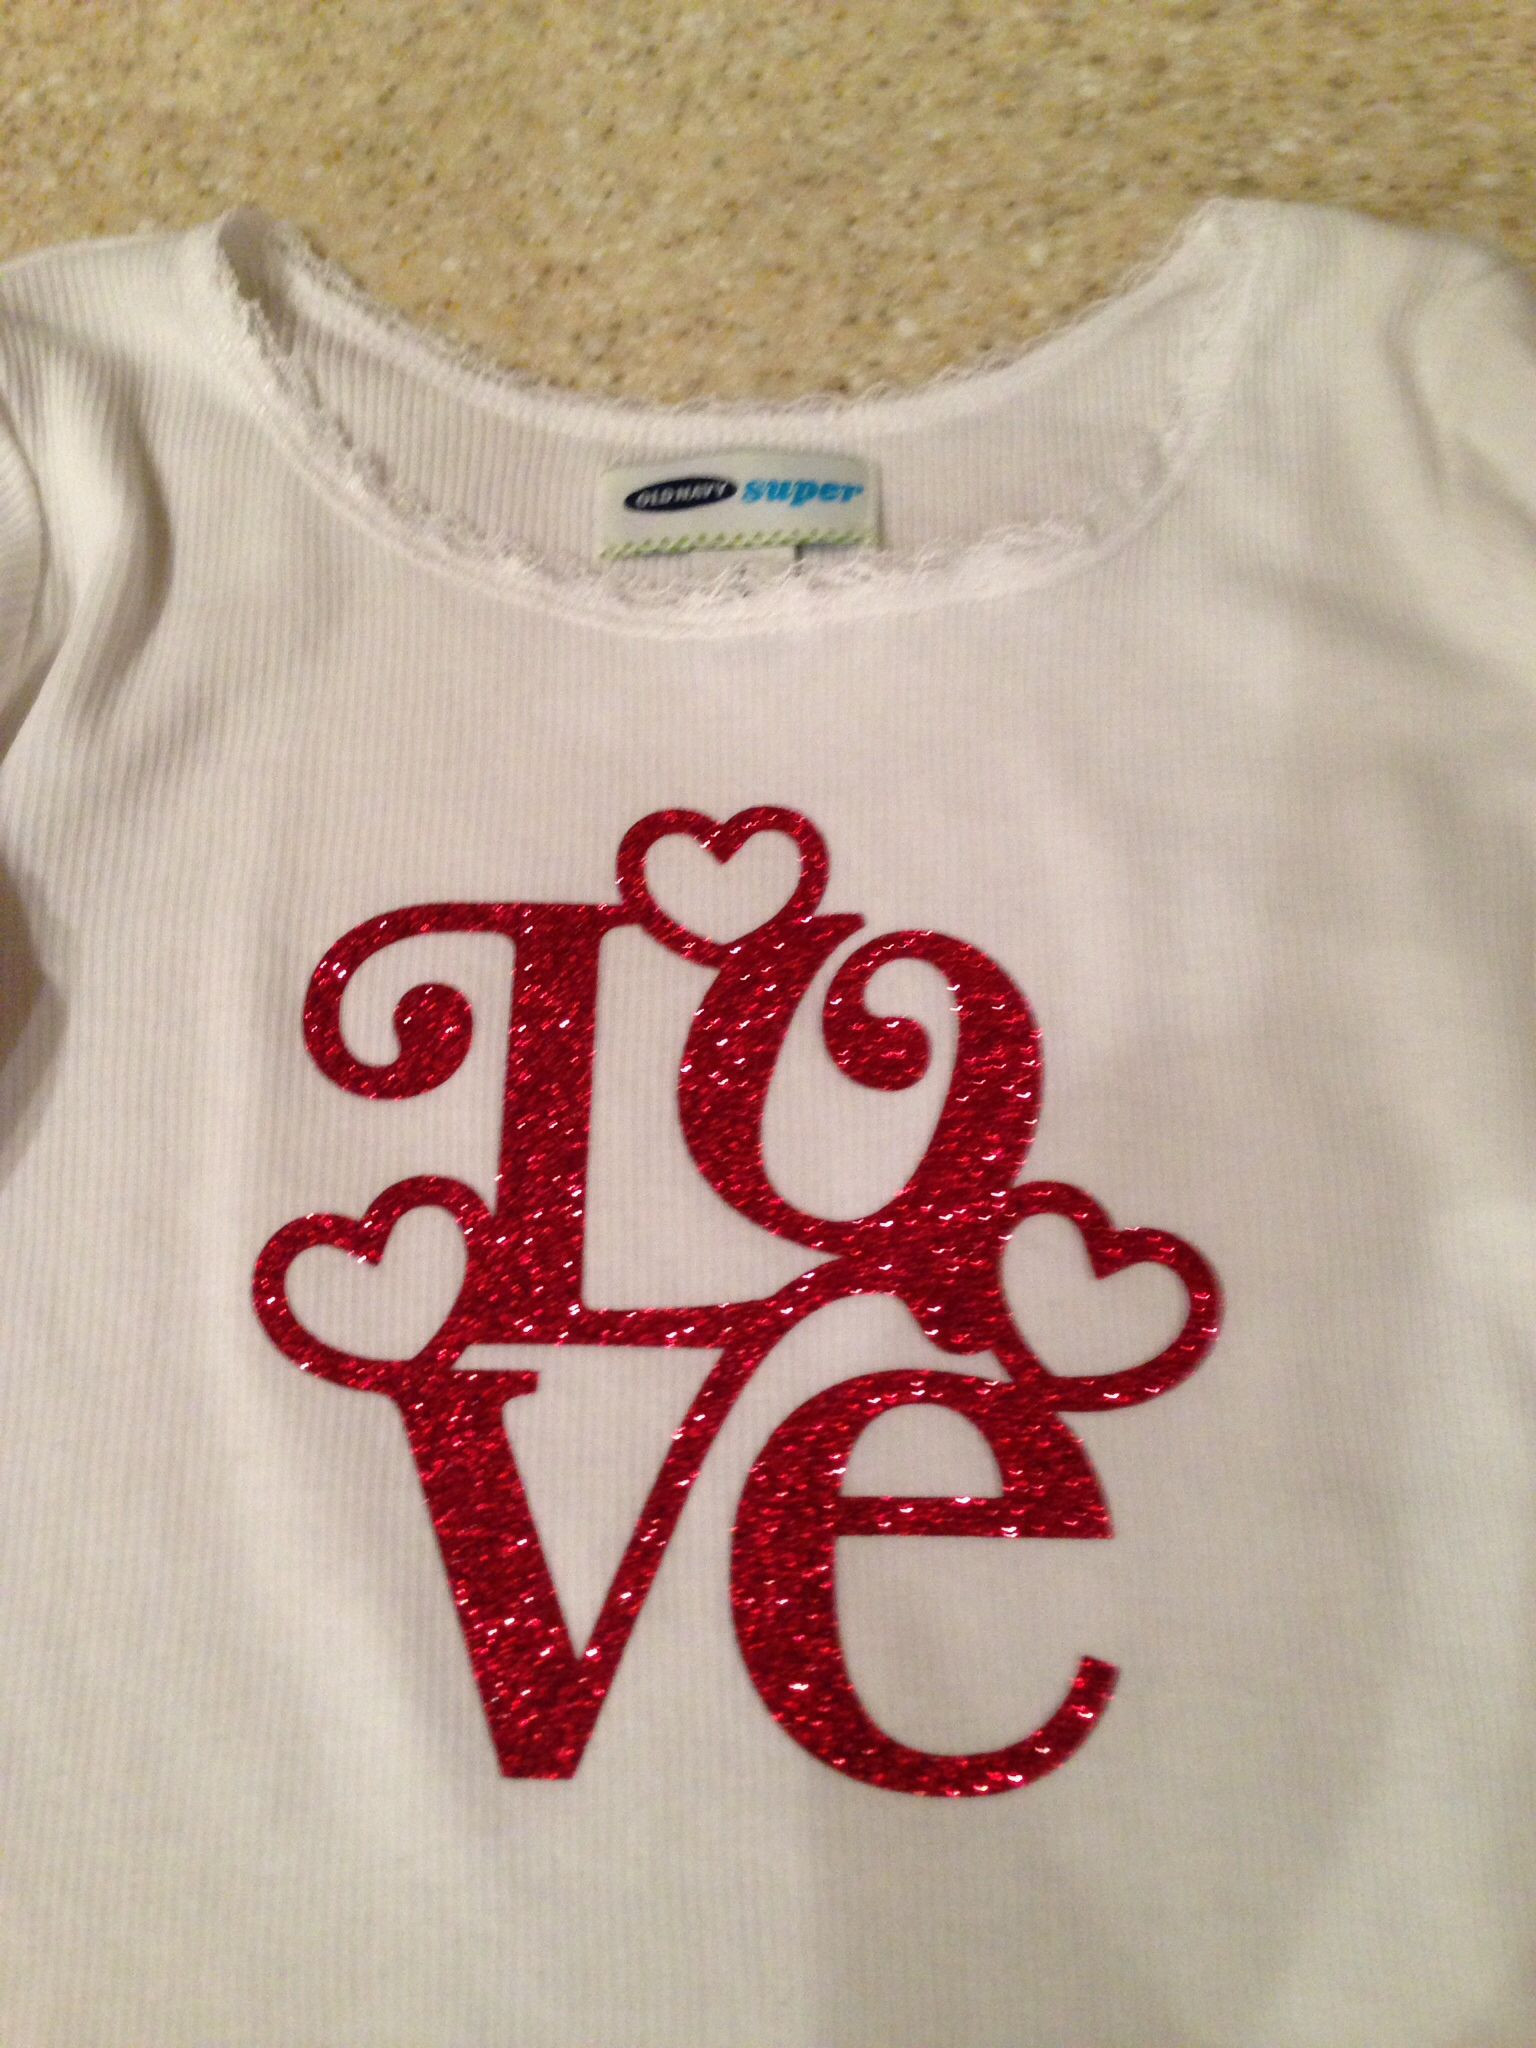 Valentines Day Shirt Ideas
 Pin by Annette Thompson on Valentines